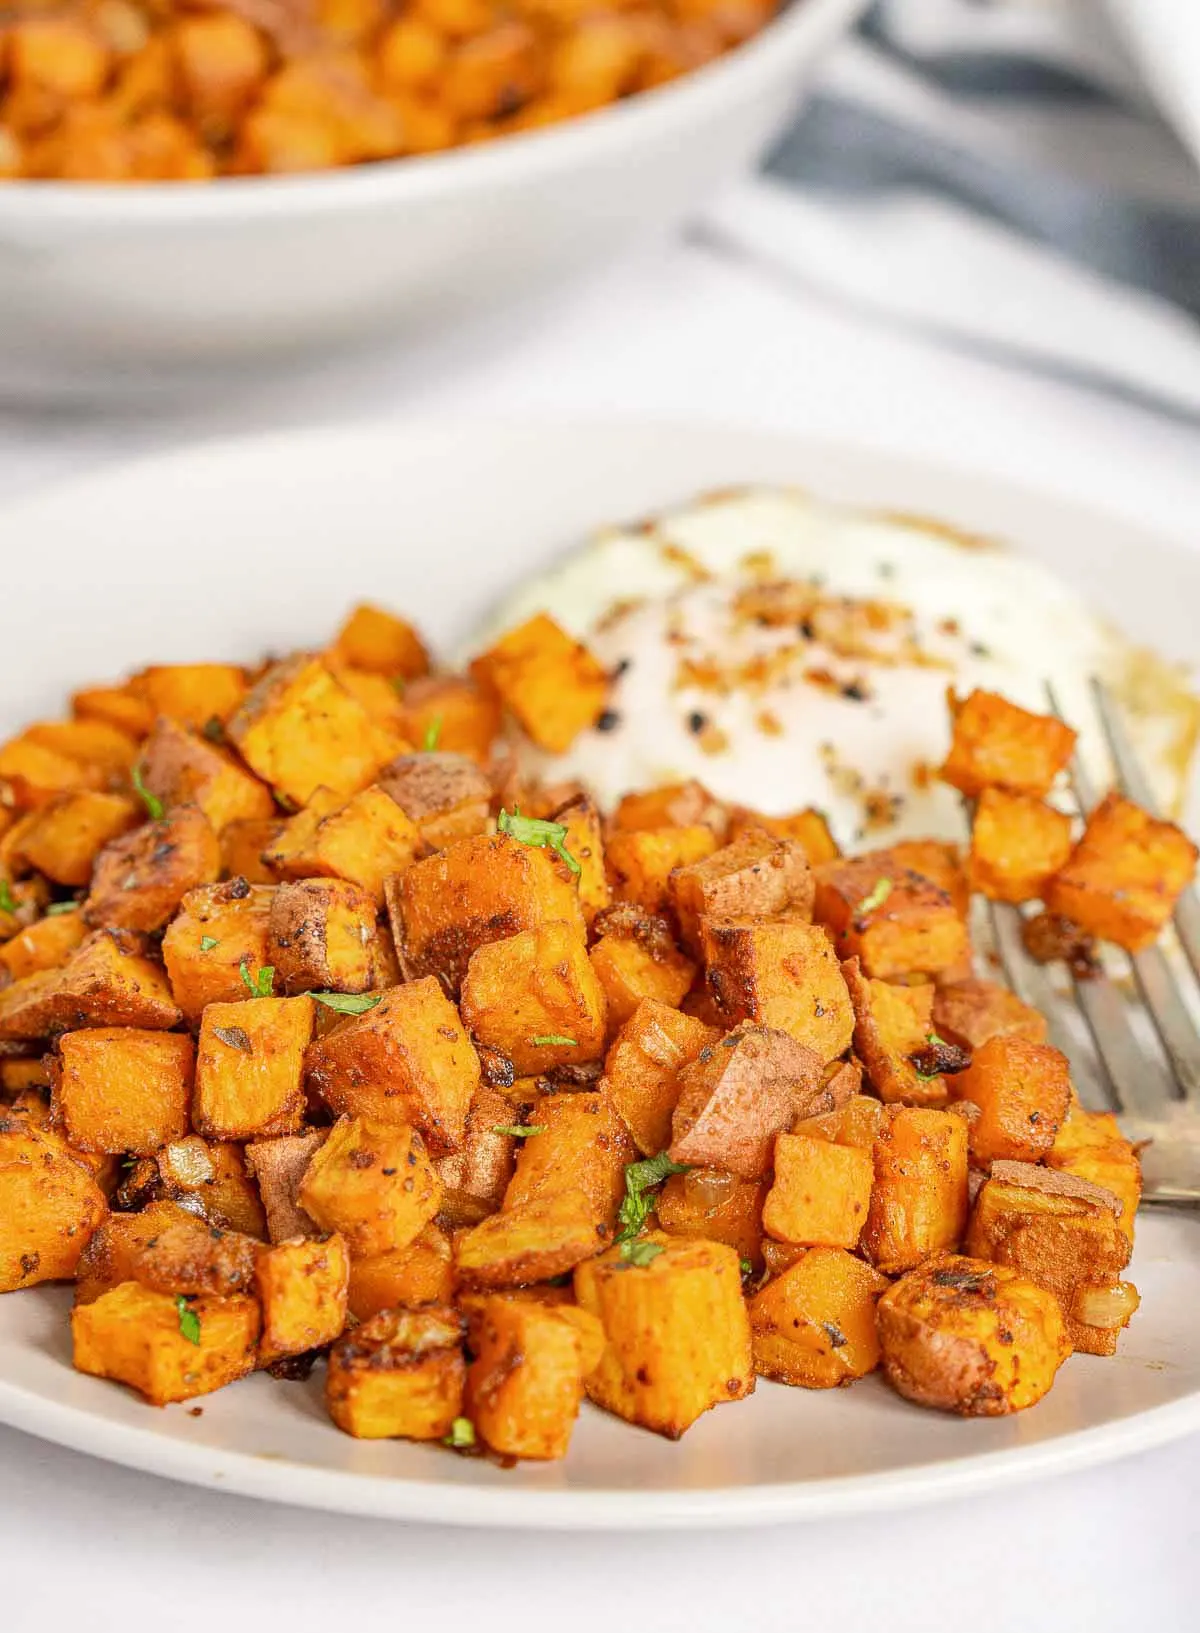 Plate of air fryer sweet potato home fries with a fried egg